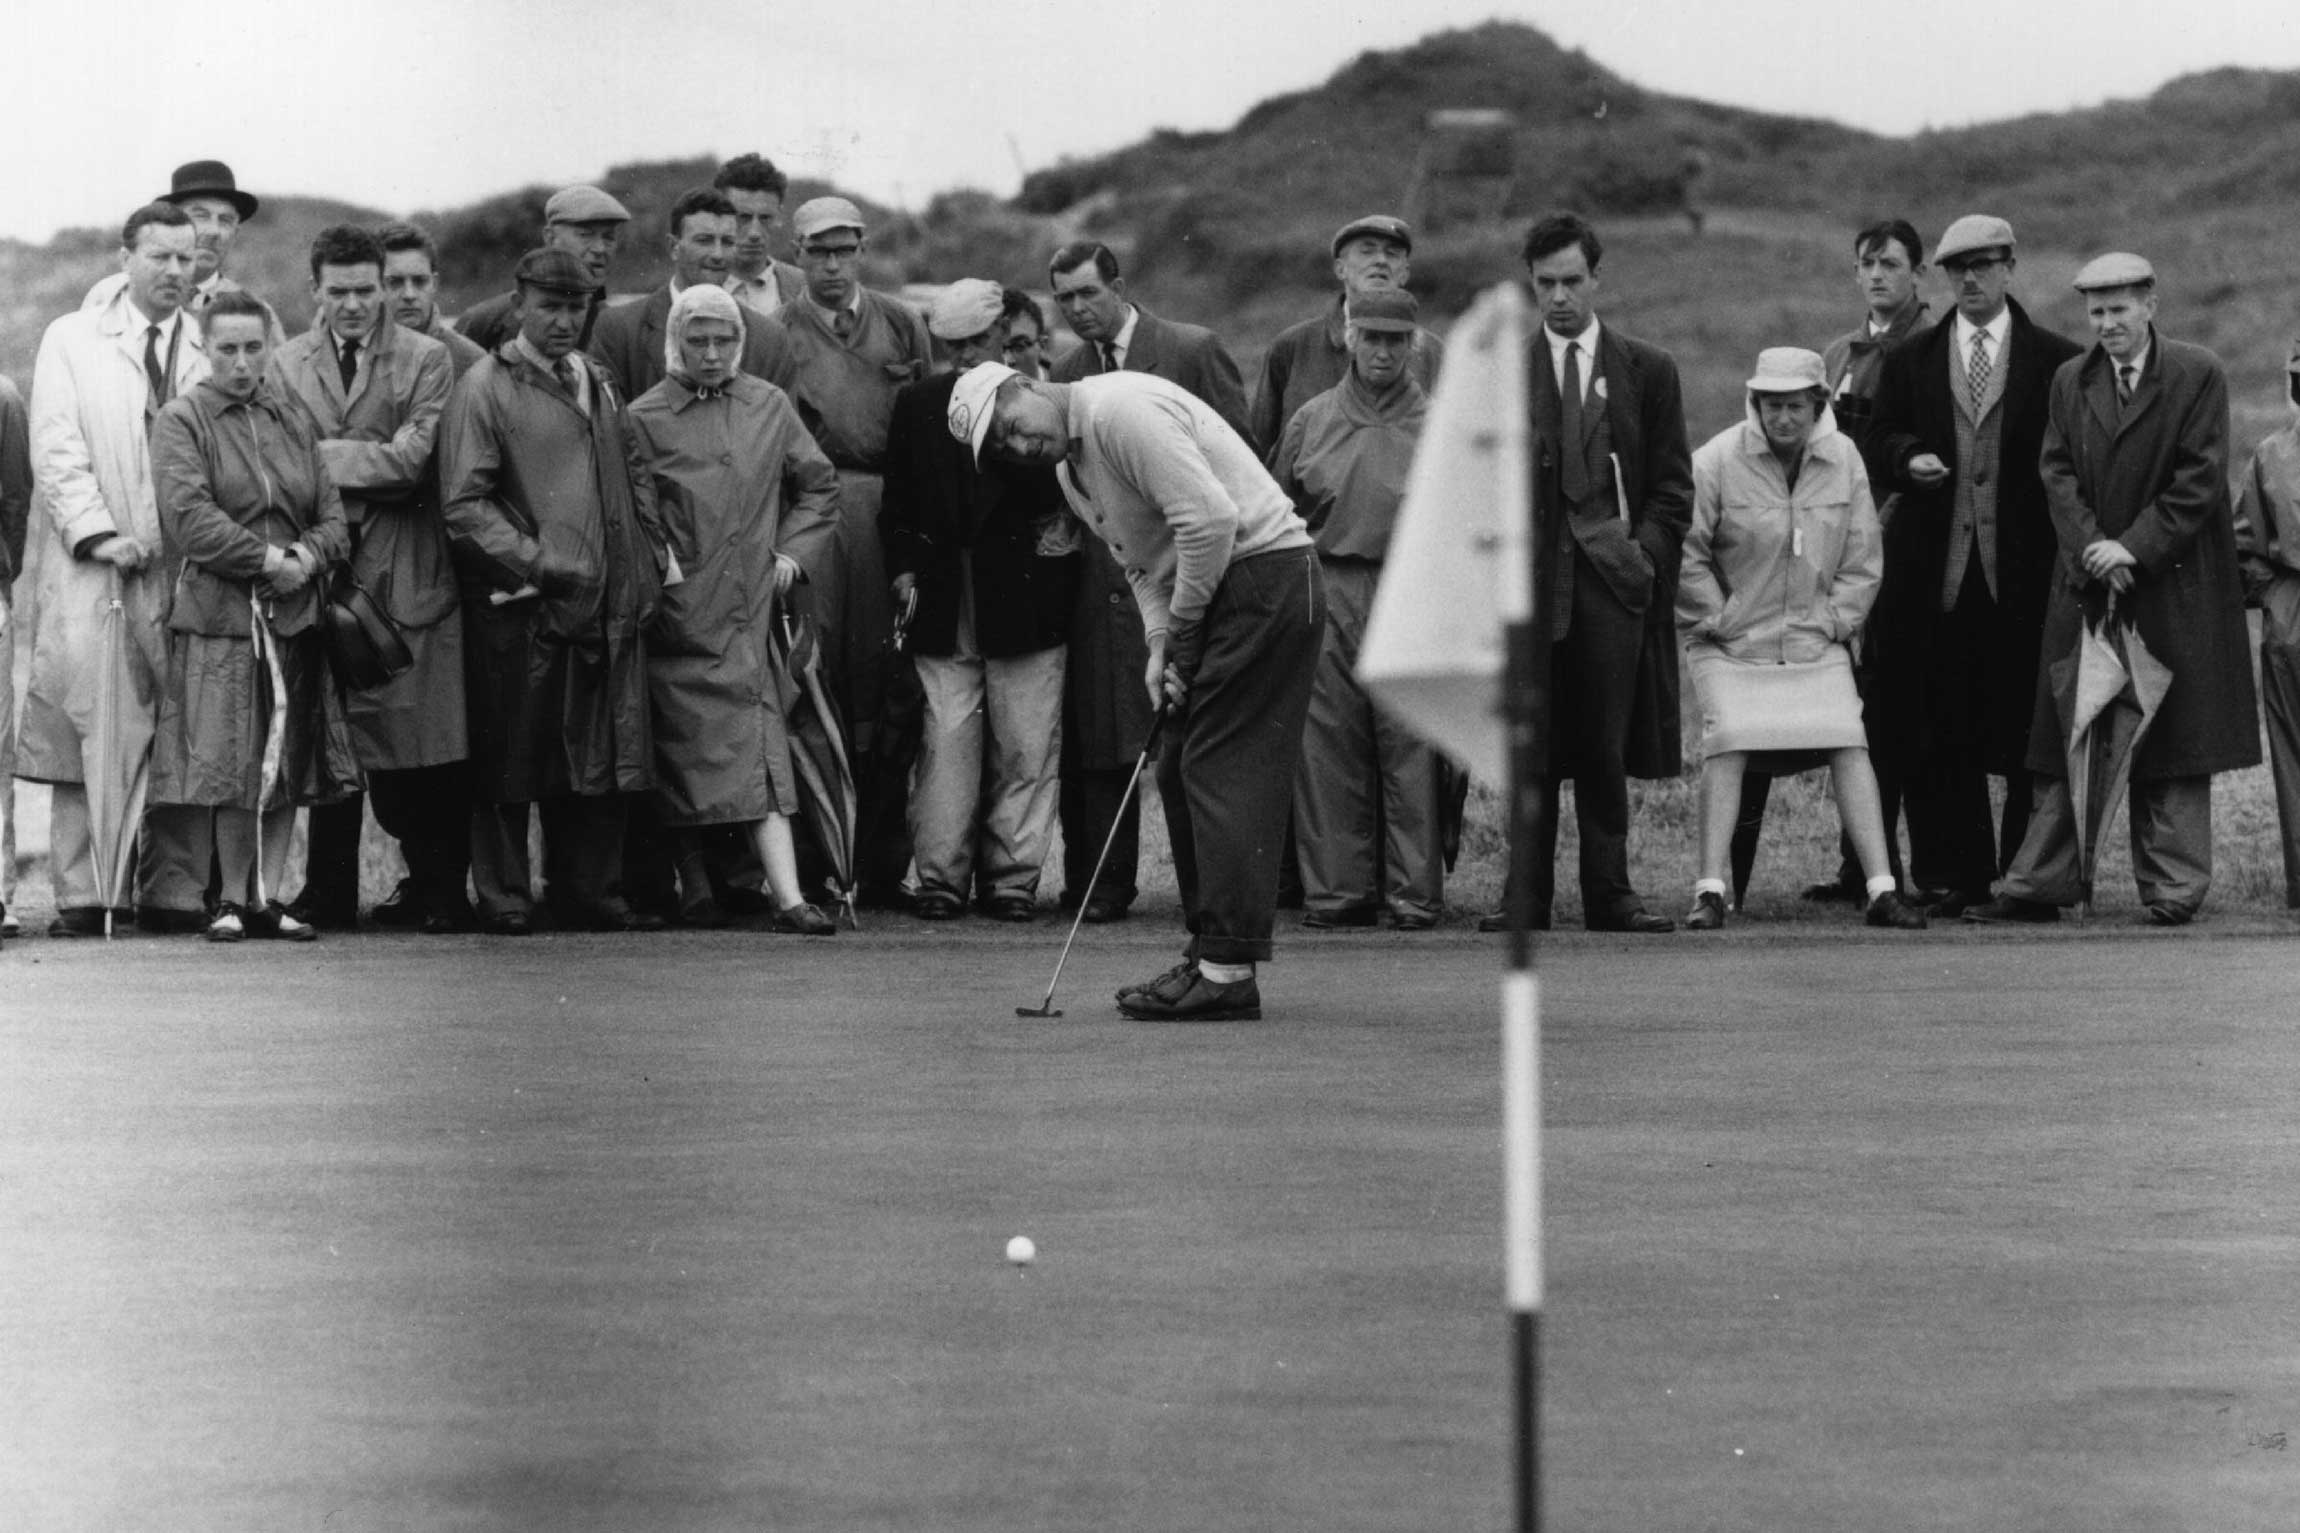 Kel Nagle in action at the 1960 Open Championship (Photo: Getty Images)